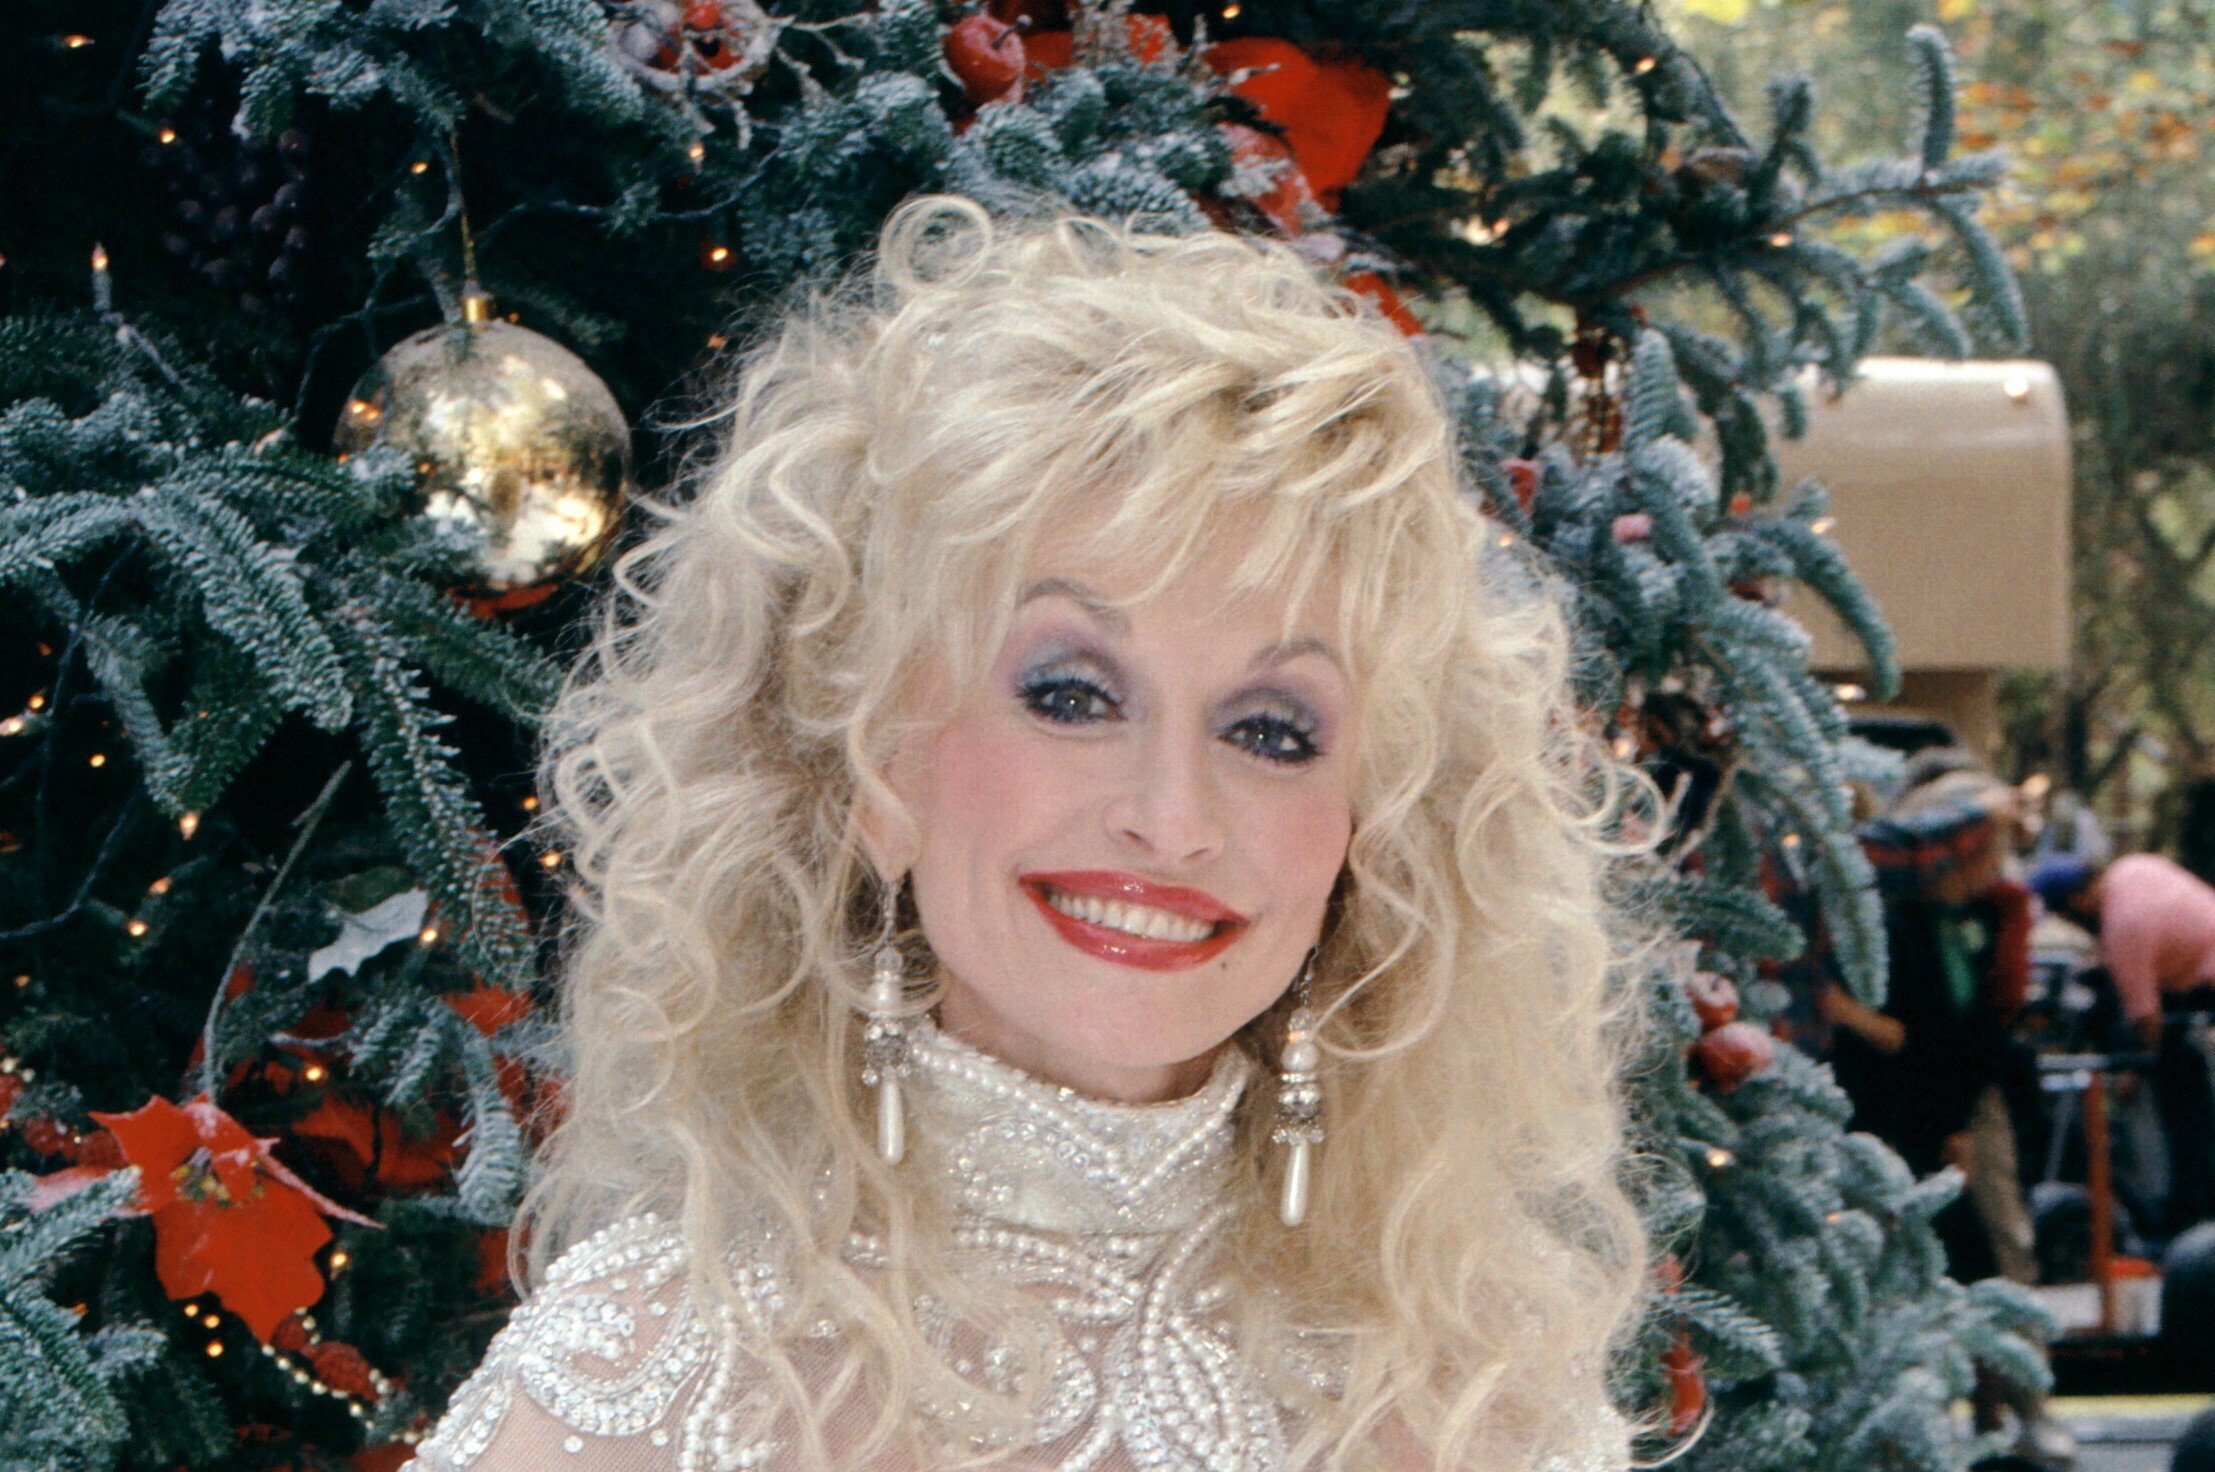 Dolly Parton wears a white beaded shirt and stands in front of a Christmas tree. Dolly Parton's Christmas movies are a part of her holiday themed works.